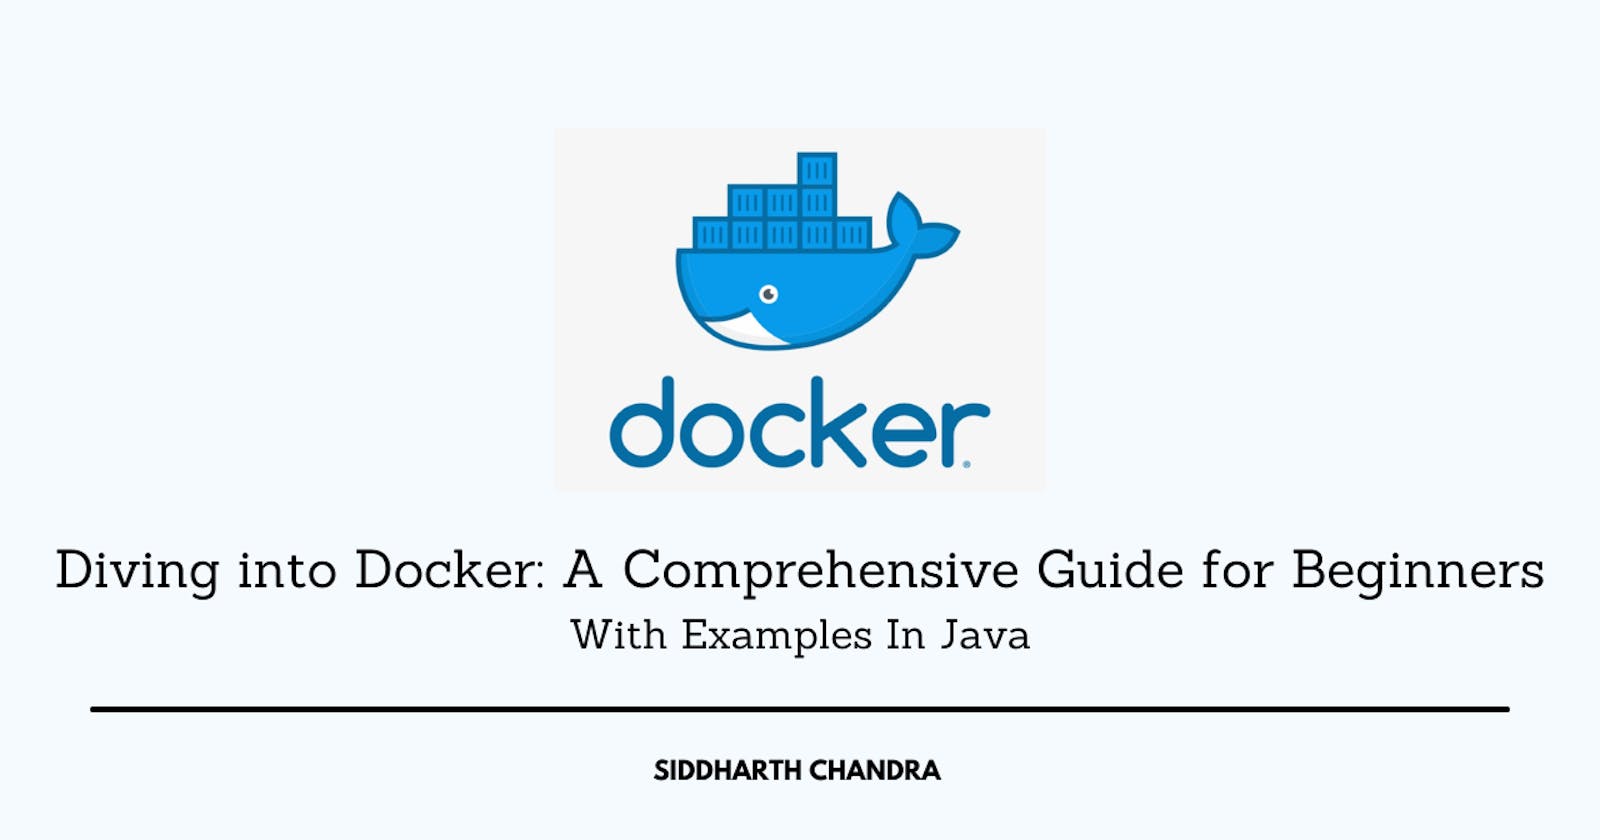 Diving into Docker: A Comprehensive Guide for Beginners